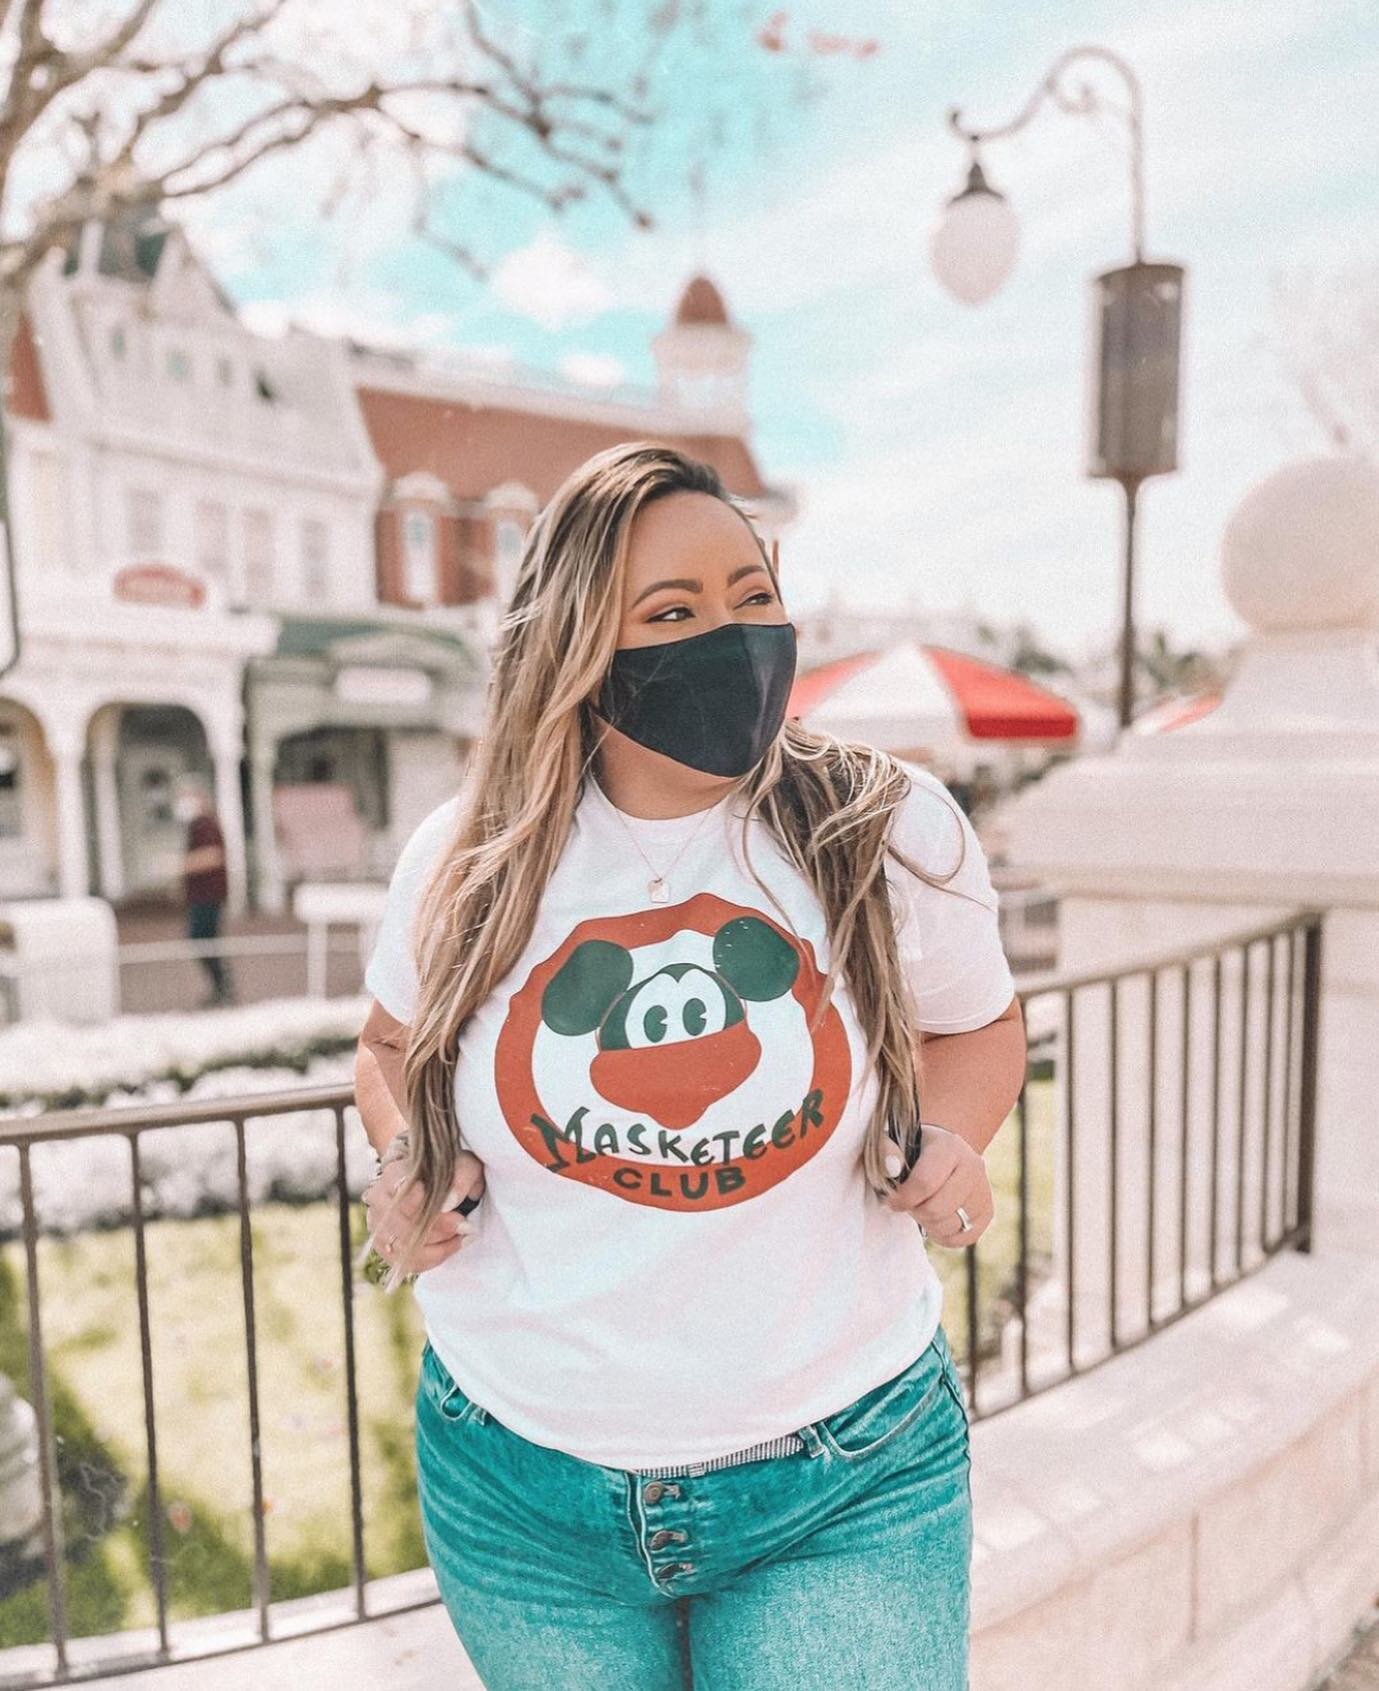 You&rsquo;ve heard of the Mouseketeers but have you joined the Masketeer Club yet? @mickeylovinmomma is showing us how to look cute while being safe and enjoying the Disney magic 🐭❤️ Have you been back to Disney yet? If so, how was it? If not, when 